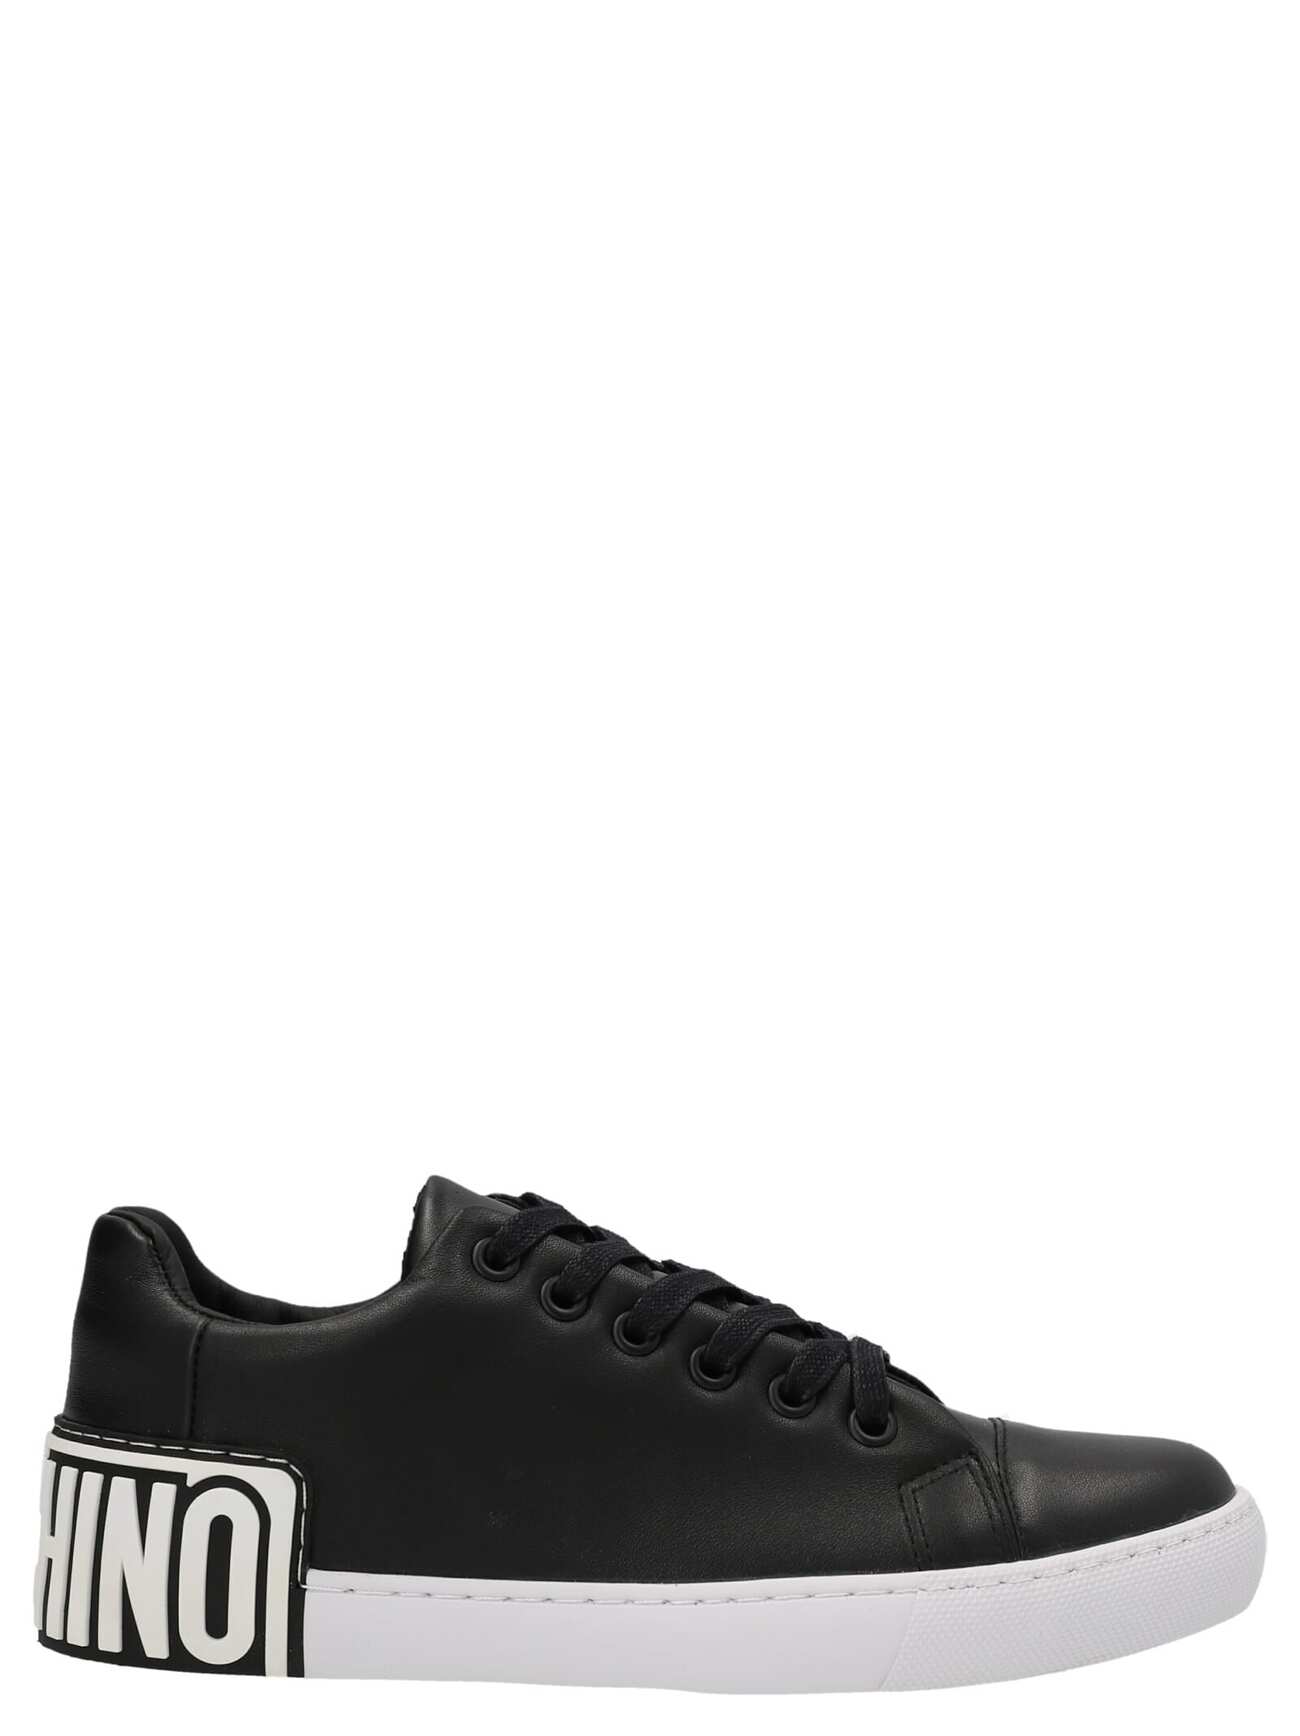 Moschino Logo Sneakers in black